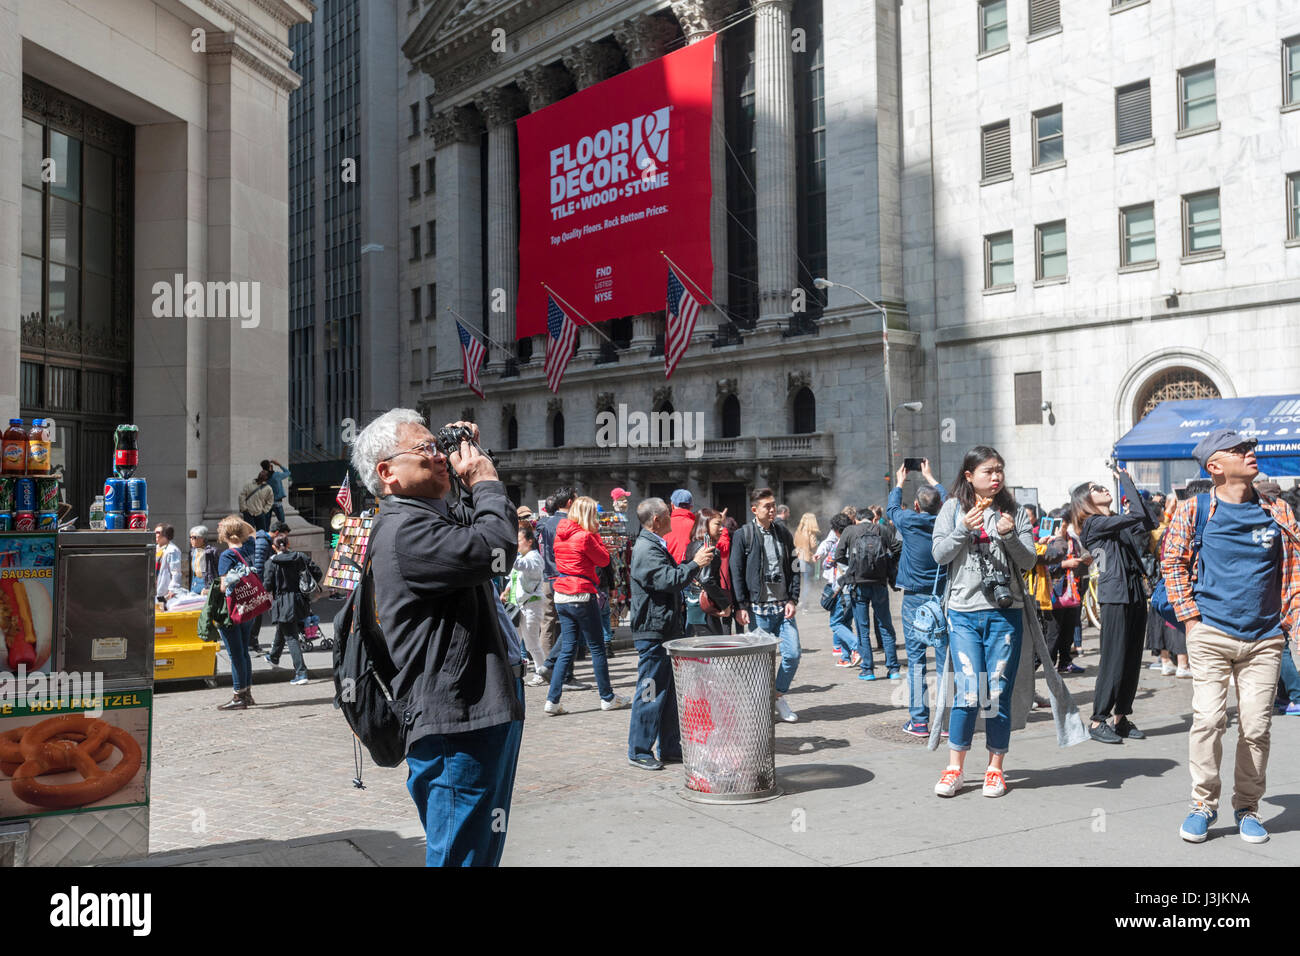 Hordes of tourists descend on the New York Stock Exchange, decorated for the first day of trading for Floor & Decor Holding's initial public offering on Thursday, April 27, 2017. Floor & Decor retails hard surface flooring such as laminate and tile as well as the accessories that go along with it.  (© Richard B. Levine) Stock Photo